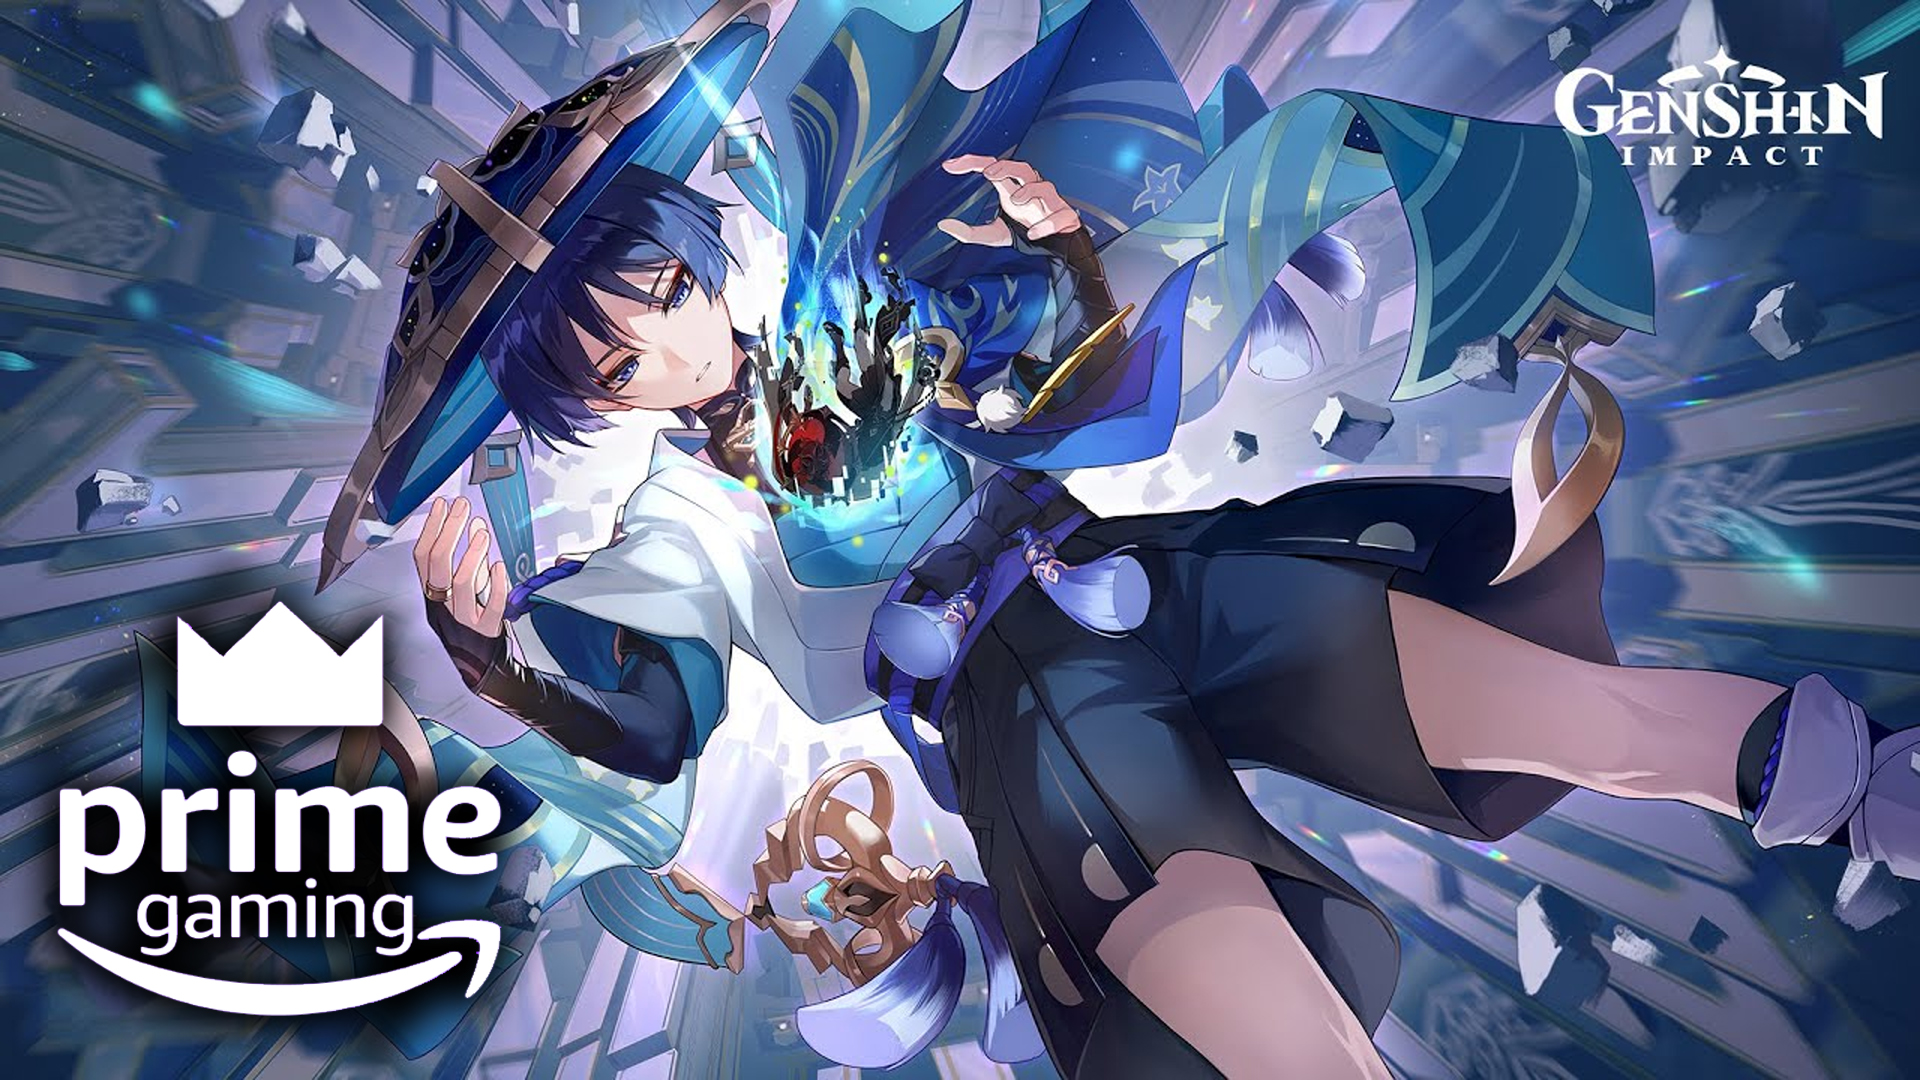 Prime Gaming - Dear adventurers of Genshin Impact, Please find the attached  bundle of goodies including: 🌙 1x Fragile Resin 💎 8x Mystic Enhancement  Ore 🟡 20,000 Mora Best wishes on your